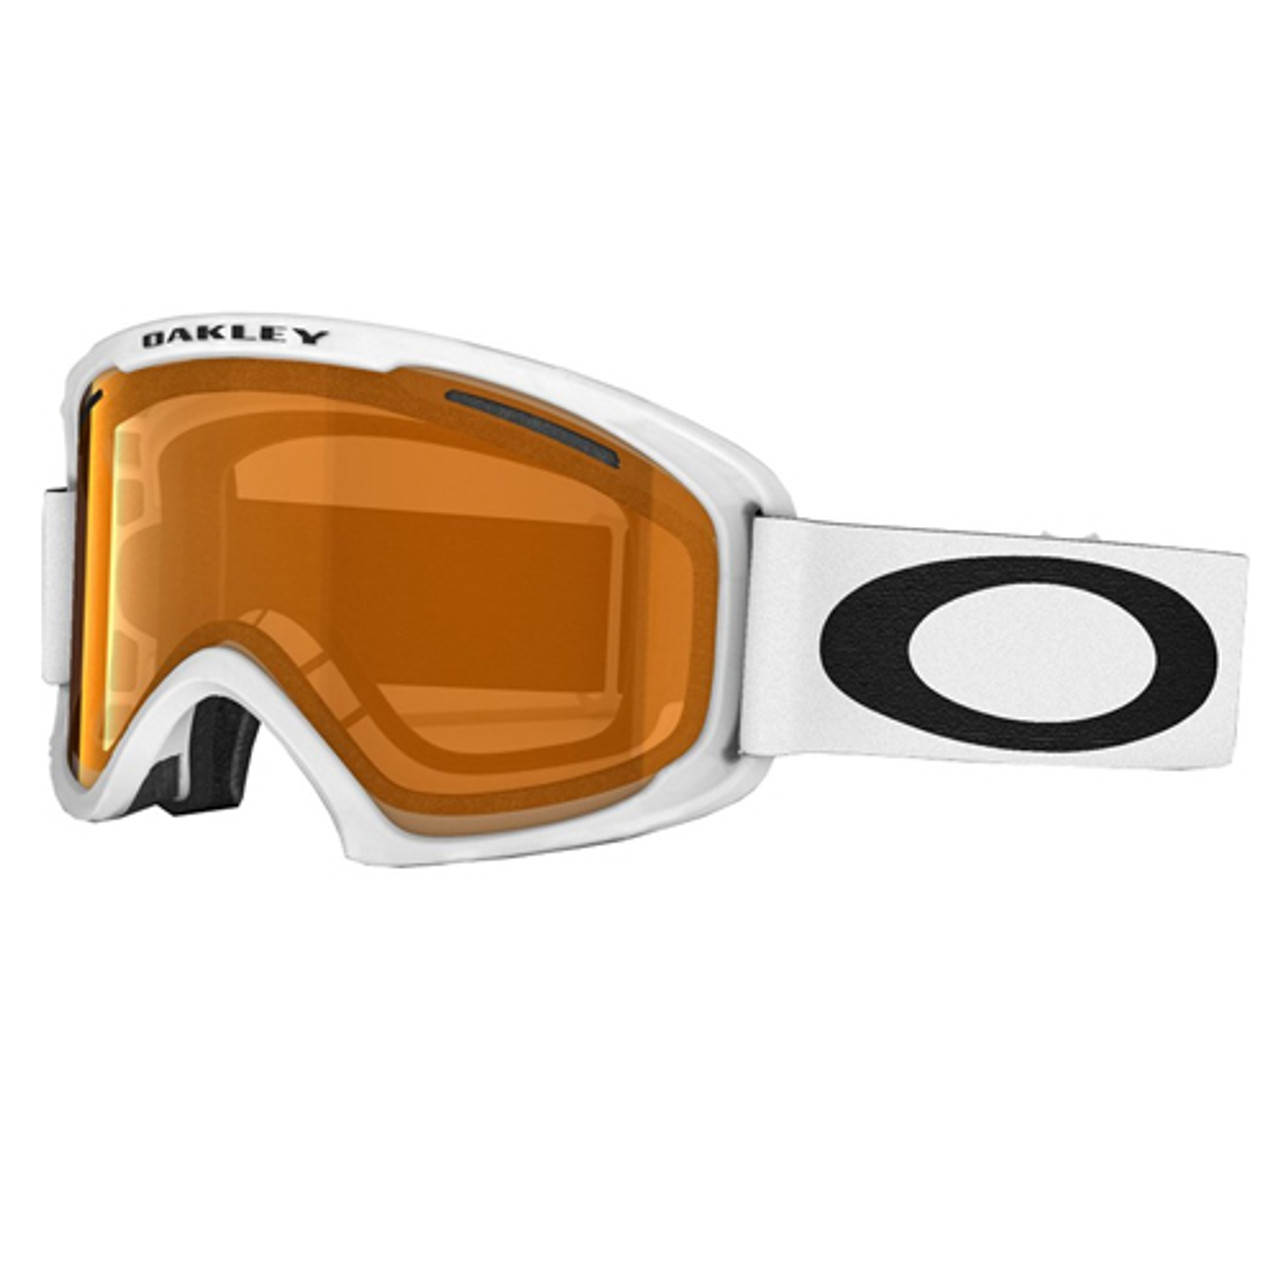 Oakley 02 XL Replacement Goggle Lenses 